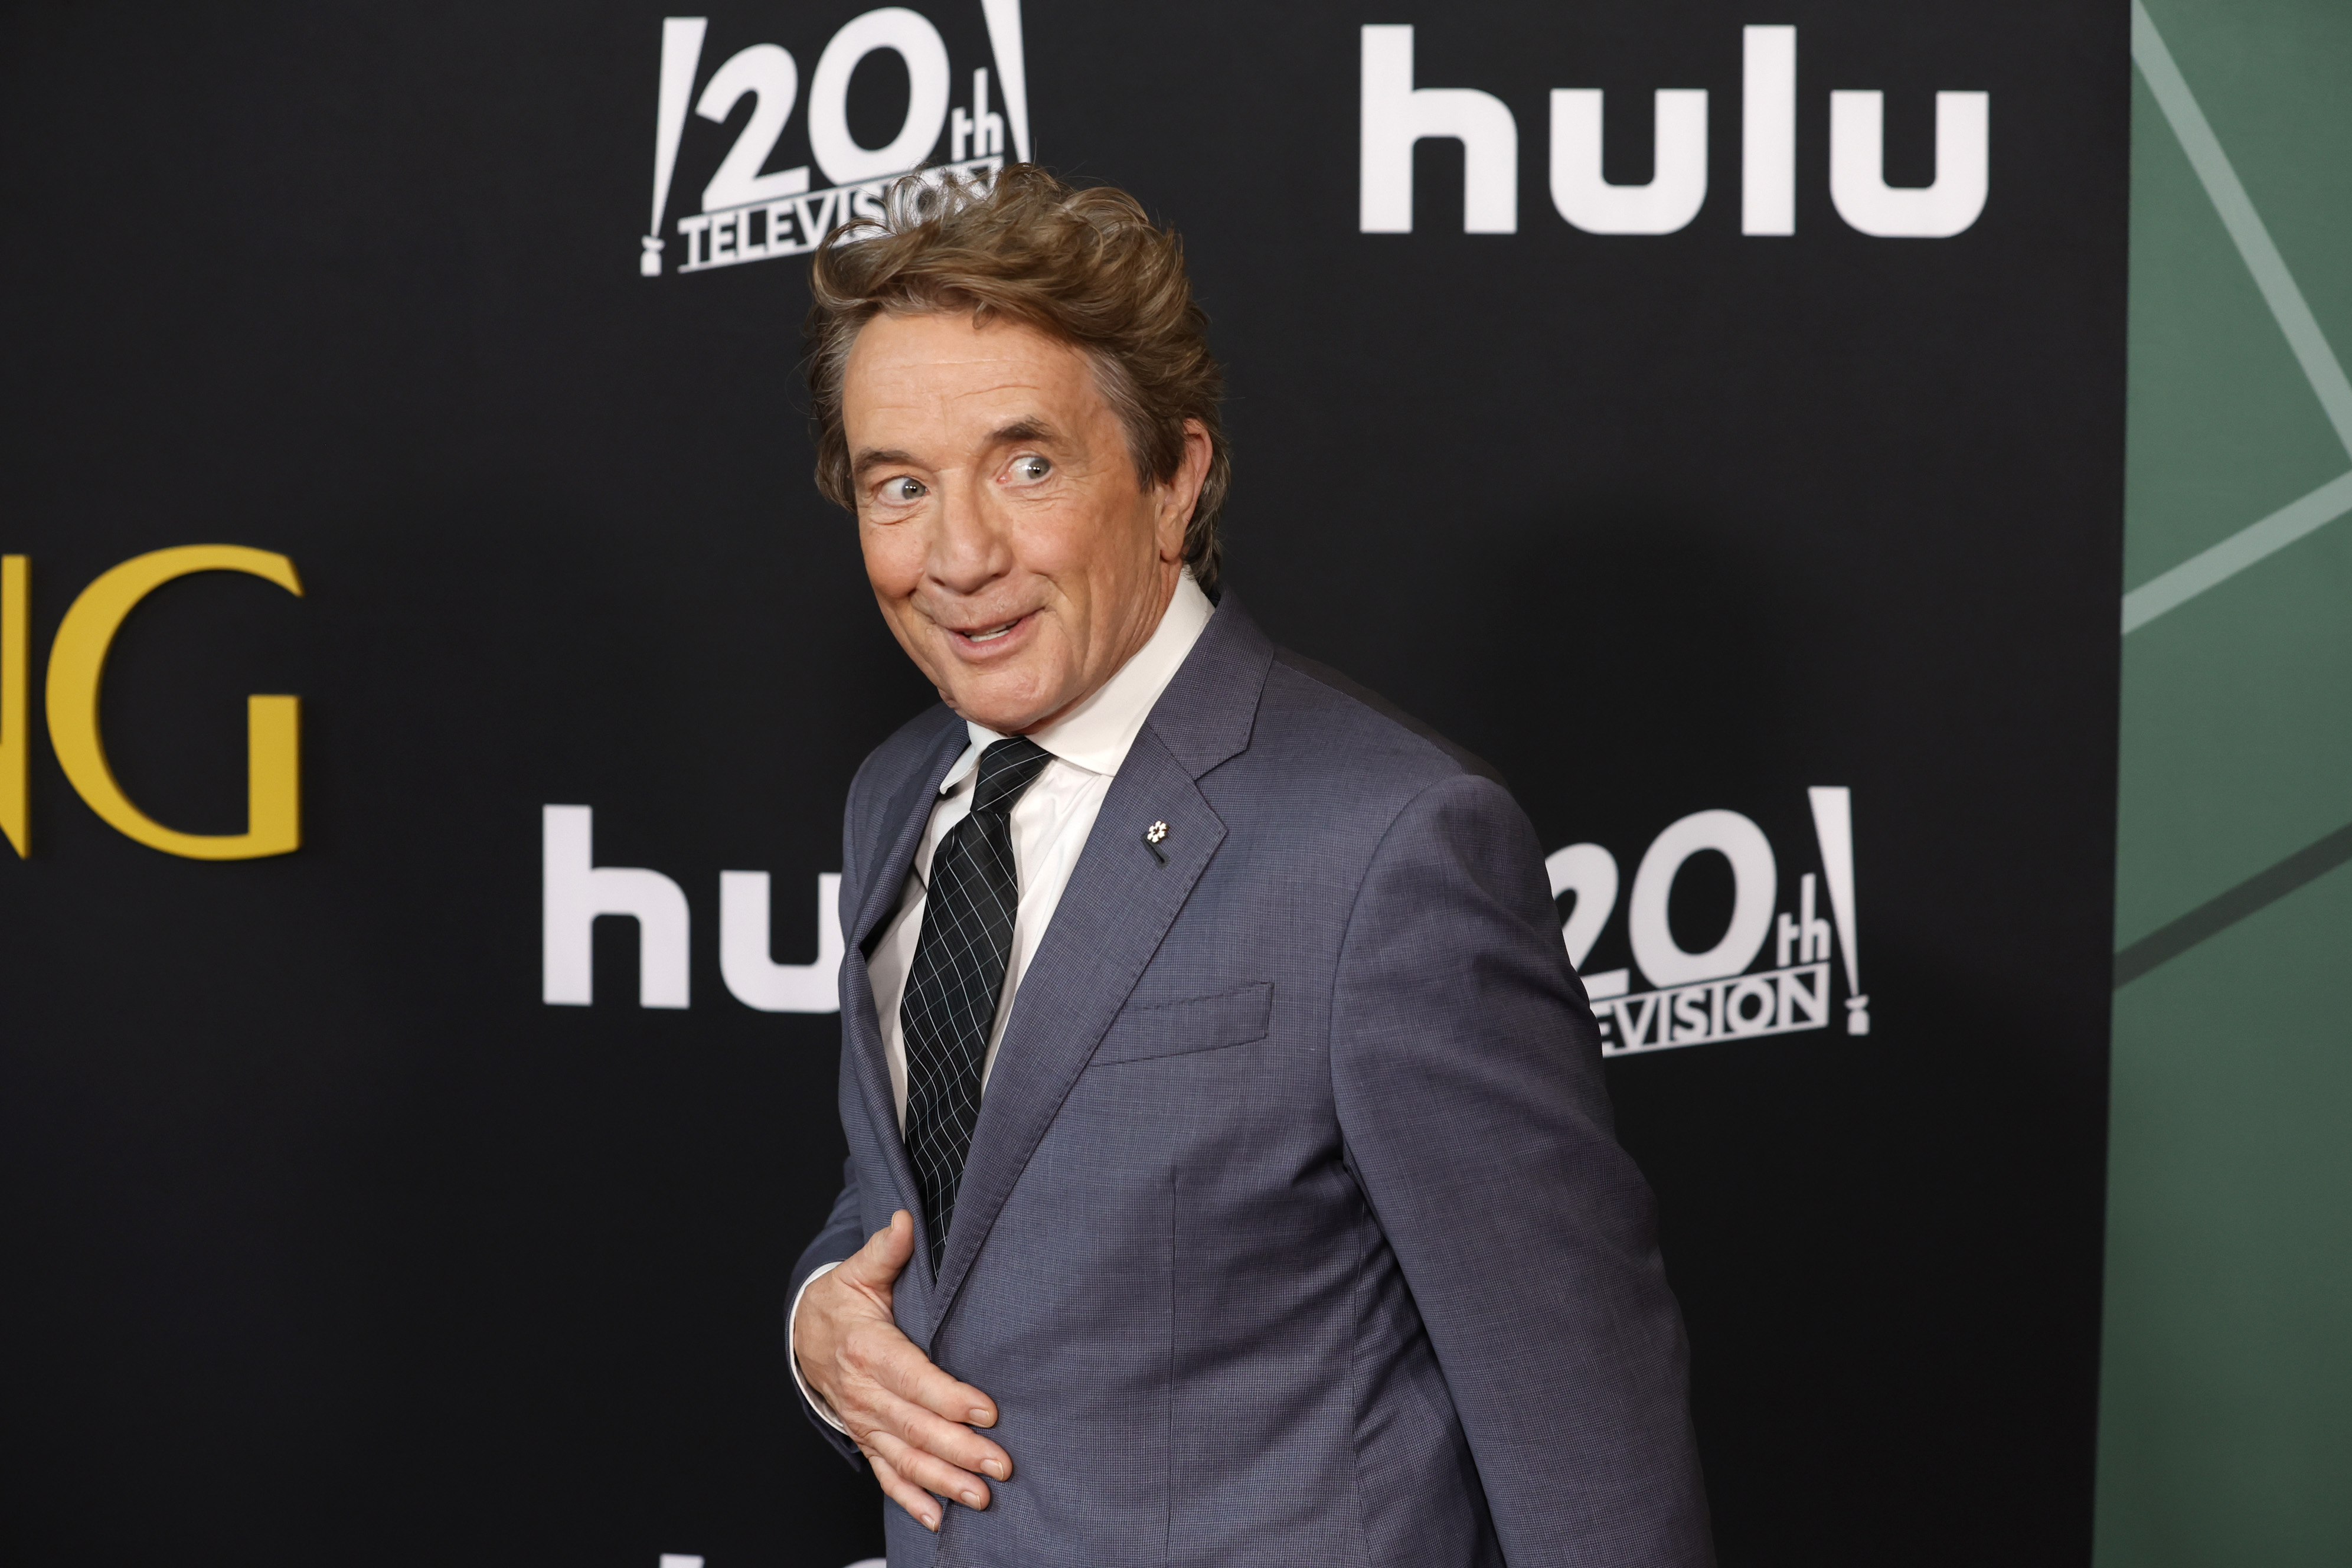 Martin Short at the premiere of "Only Murders In The Building" Season 2 on June 27, 2022, in Los Angeles, California. | Source: Getty Images